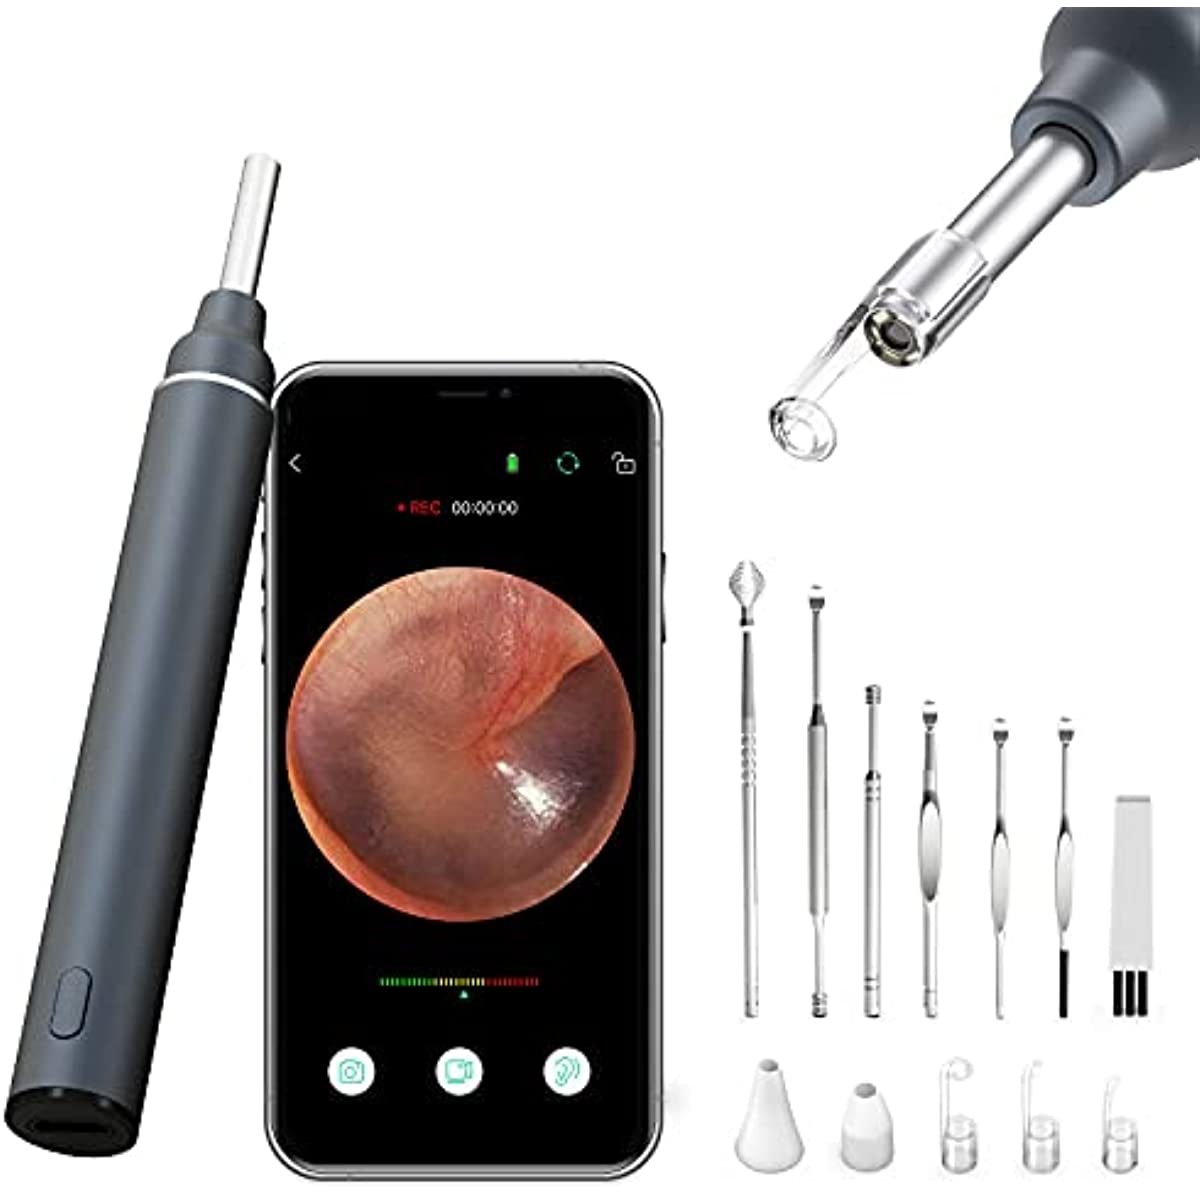 VITCOCO Ear Wax Removal Kit Ear Camera 1920P HD Ear Wax Removal Tool Ear Cleaner Otoscope with 6 LED Lights, 3mm Visual Ear Scope for iPhone iPad Android